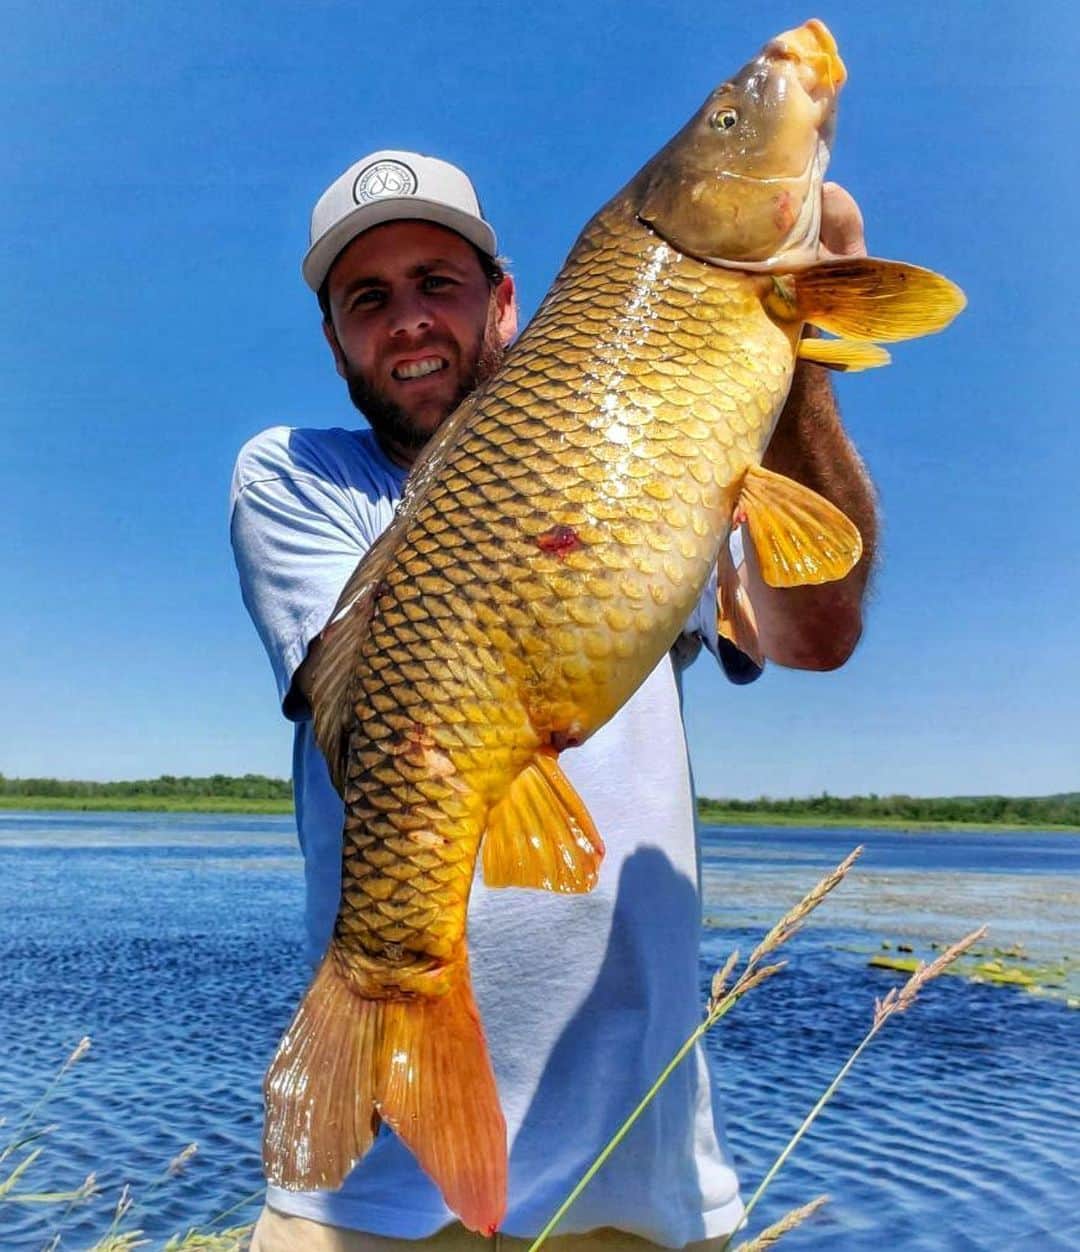 Filthy Anglers™のインスタグラム：「This carp was 1 of 6 species on the day for @tyler_the_fish_whisperer - congrats on the catch you are Certified Filthy www.filthyanglers.com #fishing #carp #outdoors #bassfishing #angler #filthyanglers #outdoors #hunting」